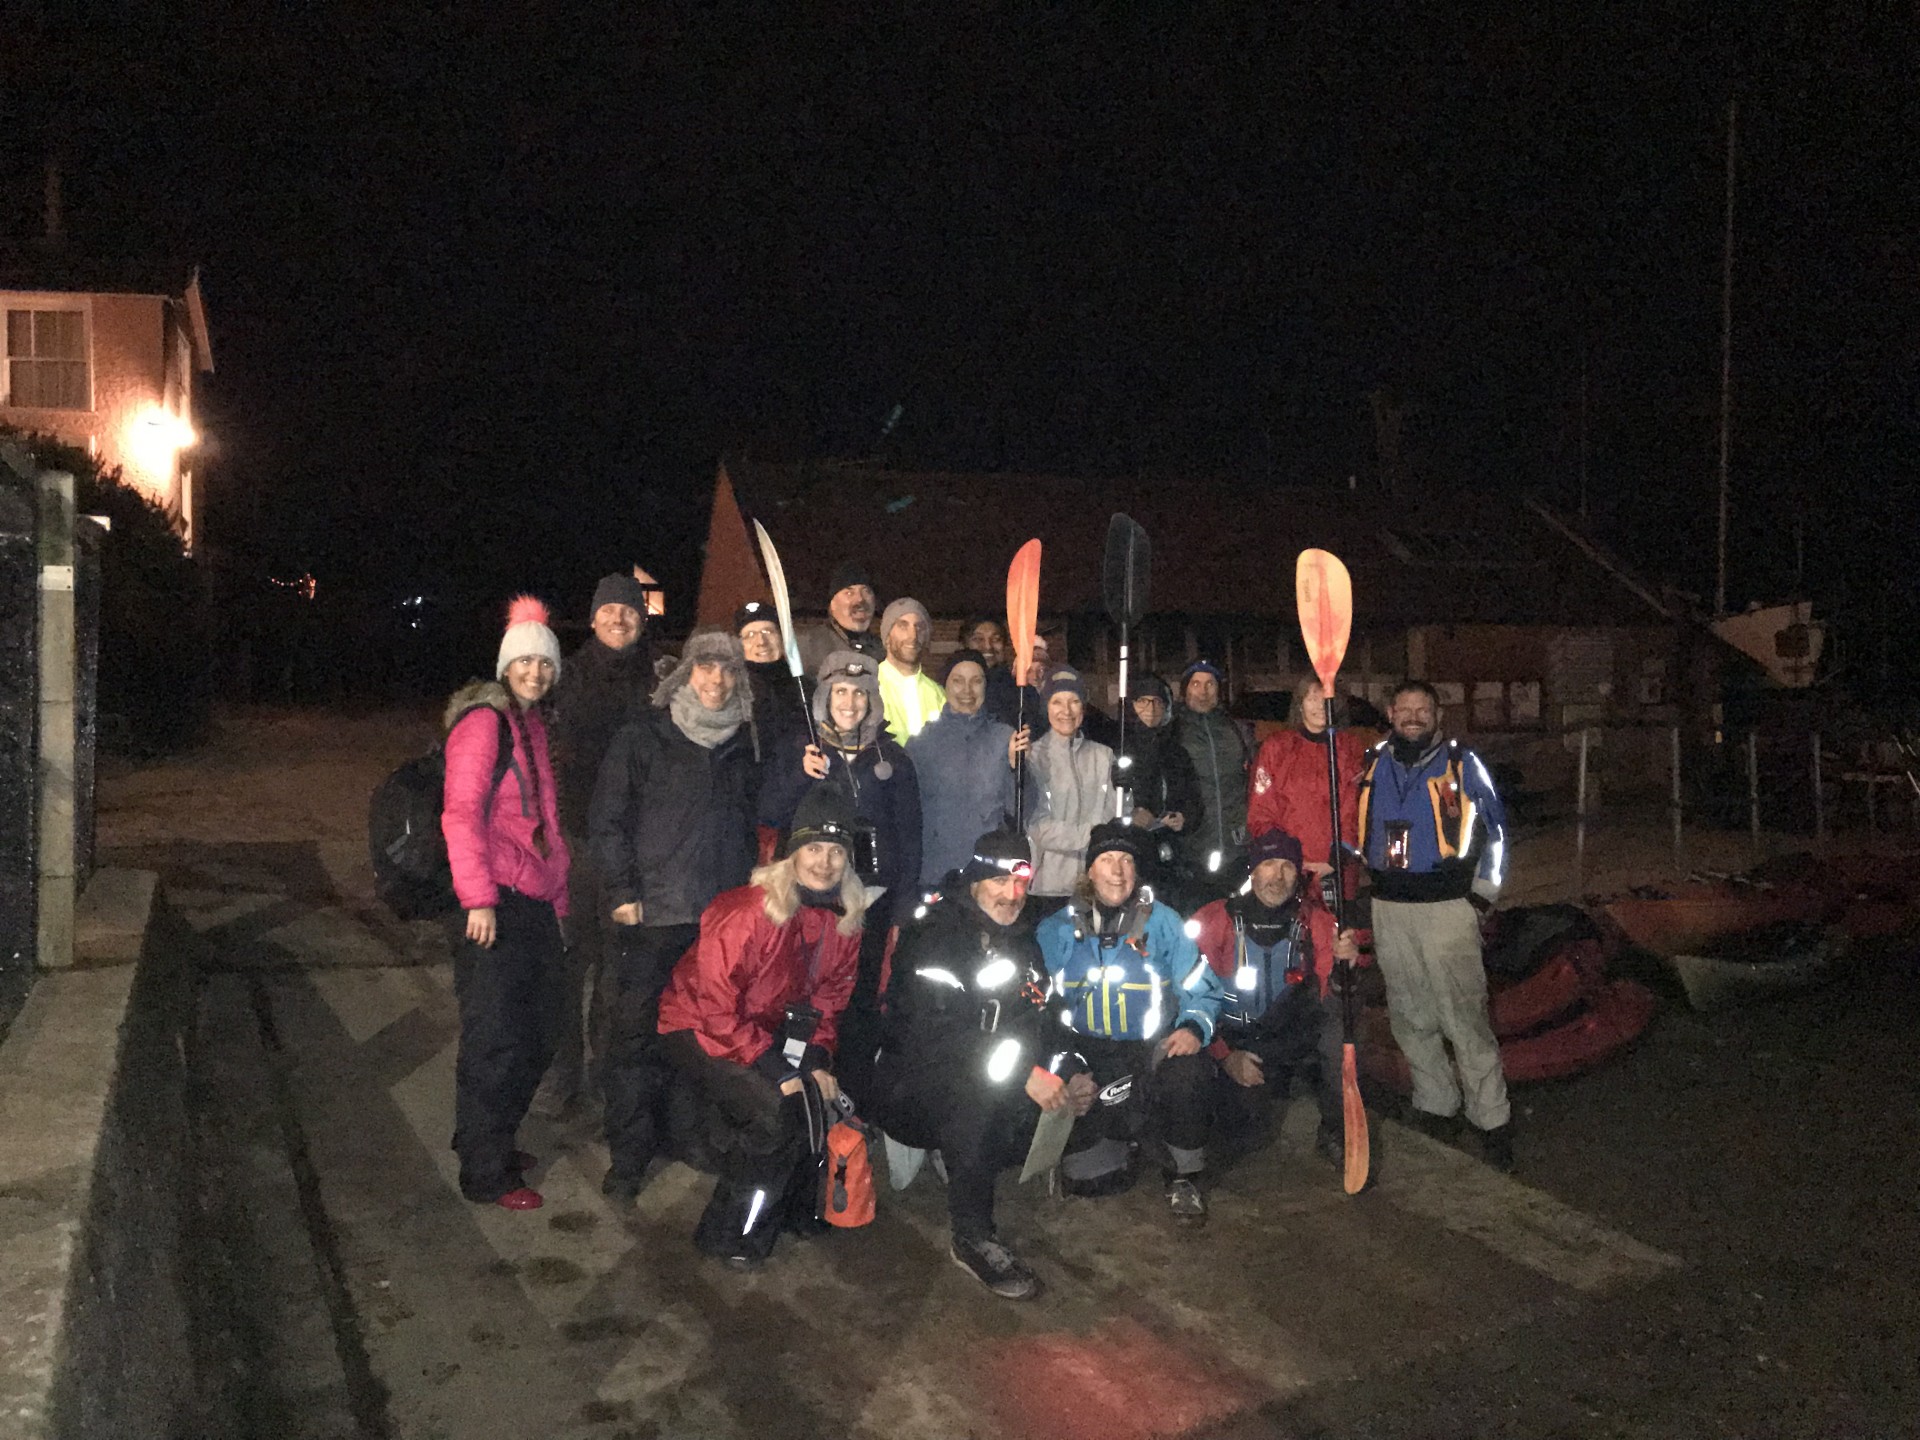 Group of paddlers posing for the camera before the new years eve fireworks by kayak trip